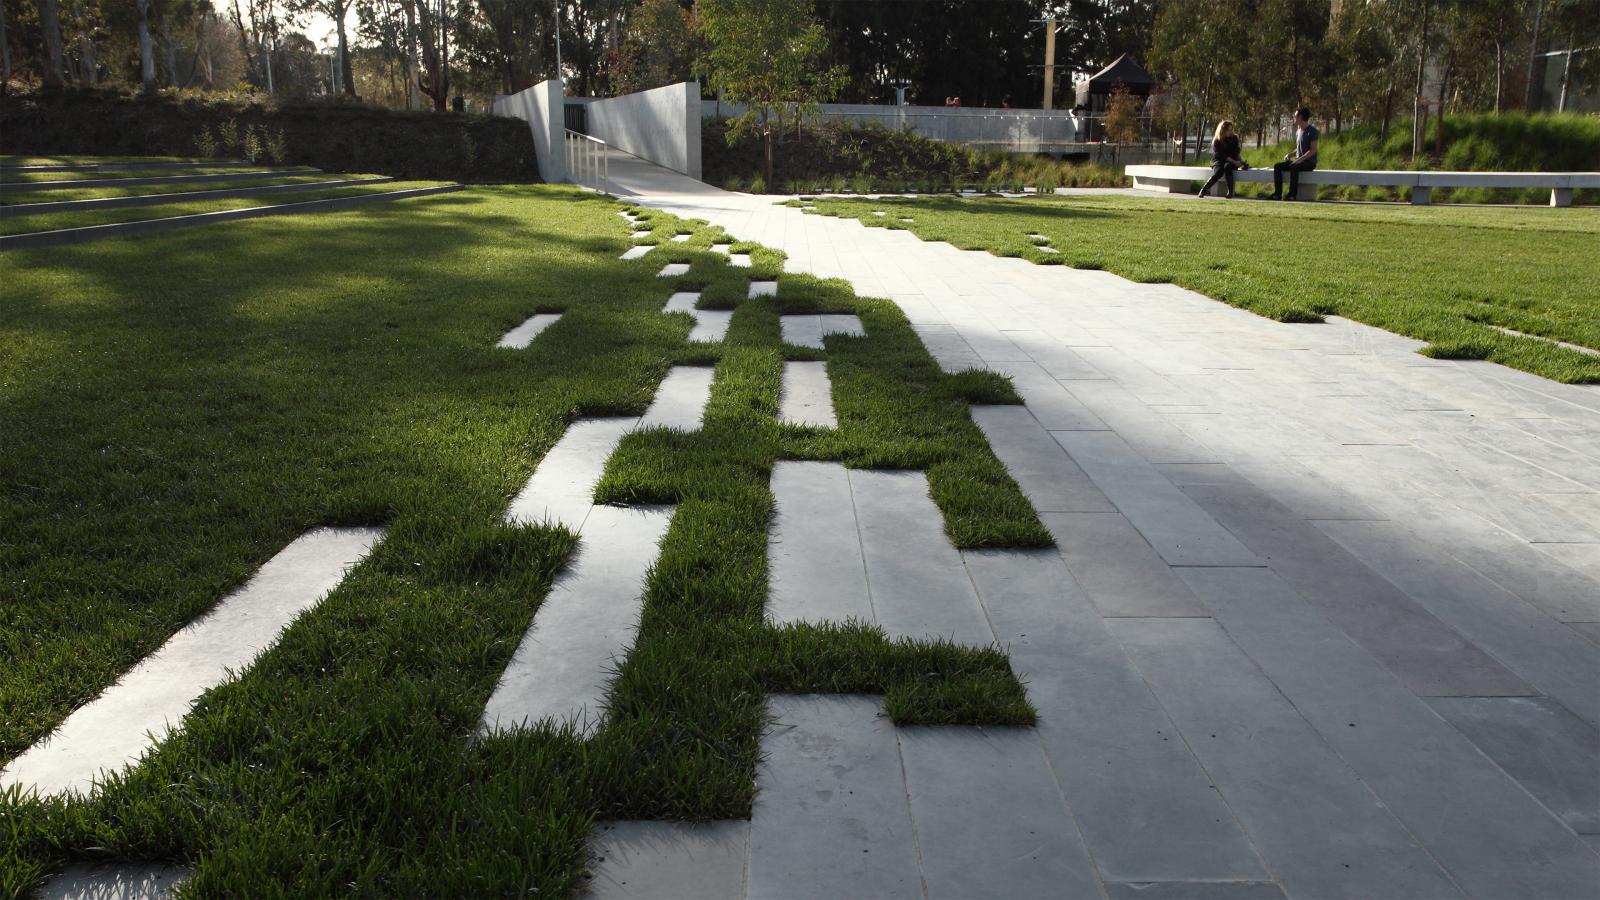 A contemporary park featuring a unique design of interlocking grass and concrete paths, reminiscent of the Australian Garden at NGA. In the background, two people are talking on a white bench. The park is surrounded by trees and greenery with an open metal gate visible in the distance.